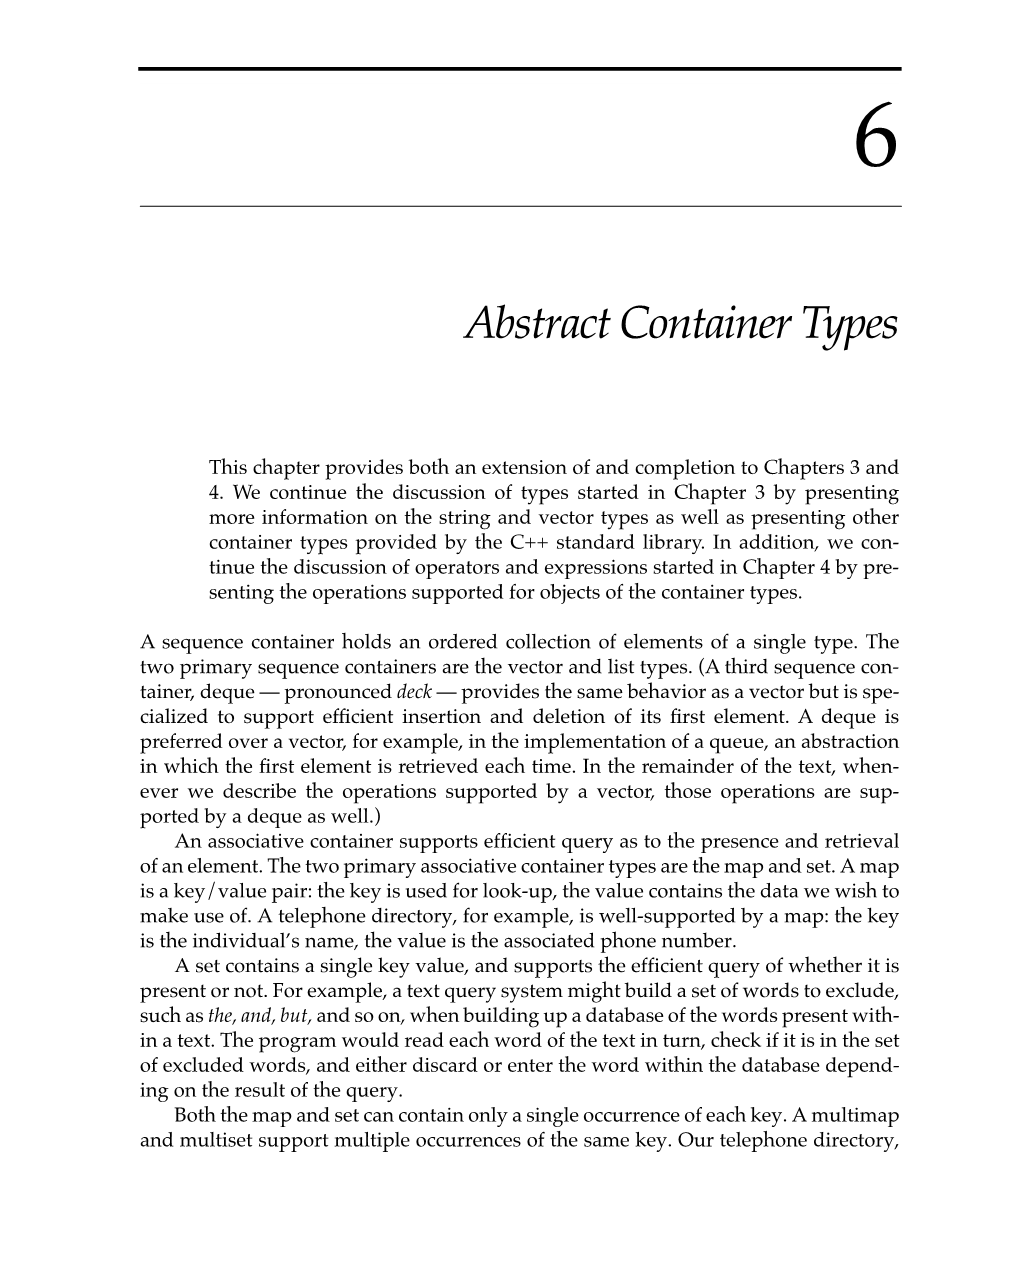 Abstract Container Types